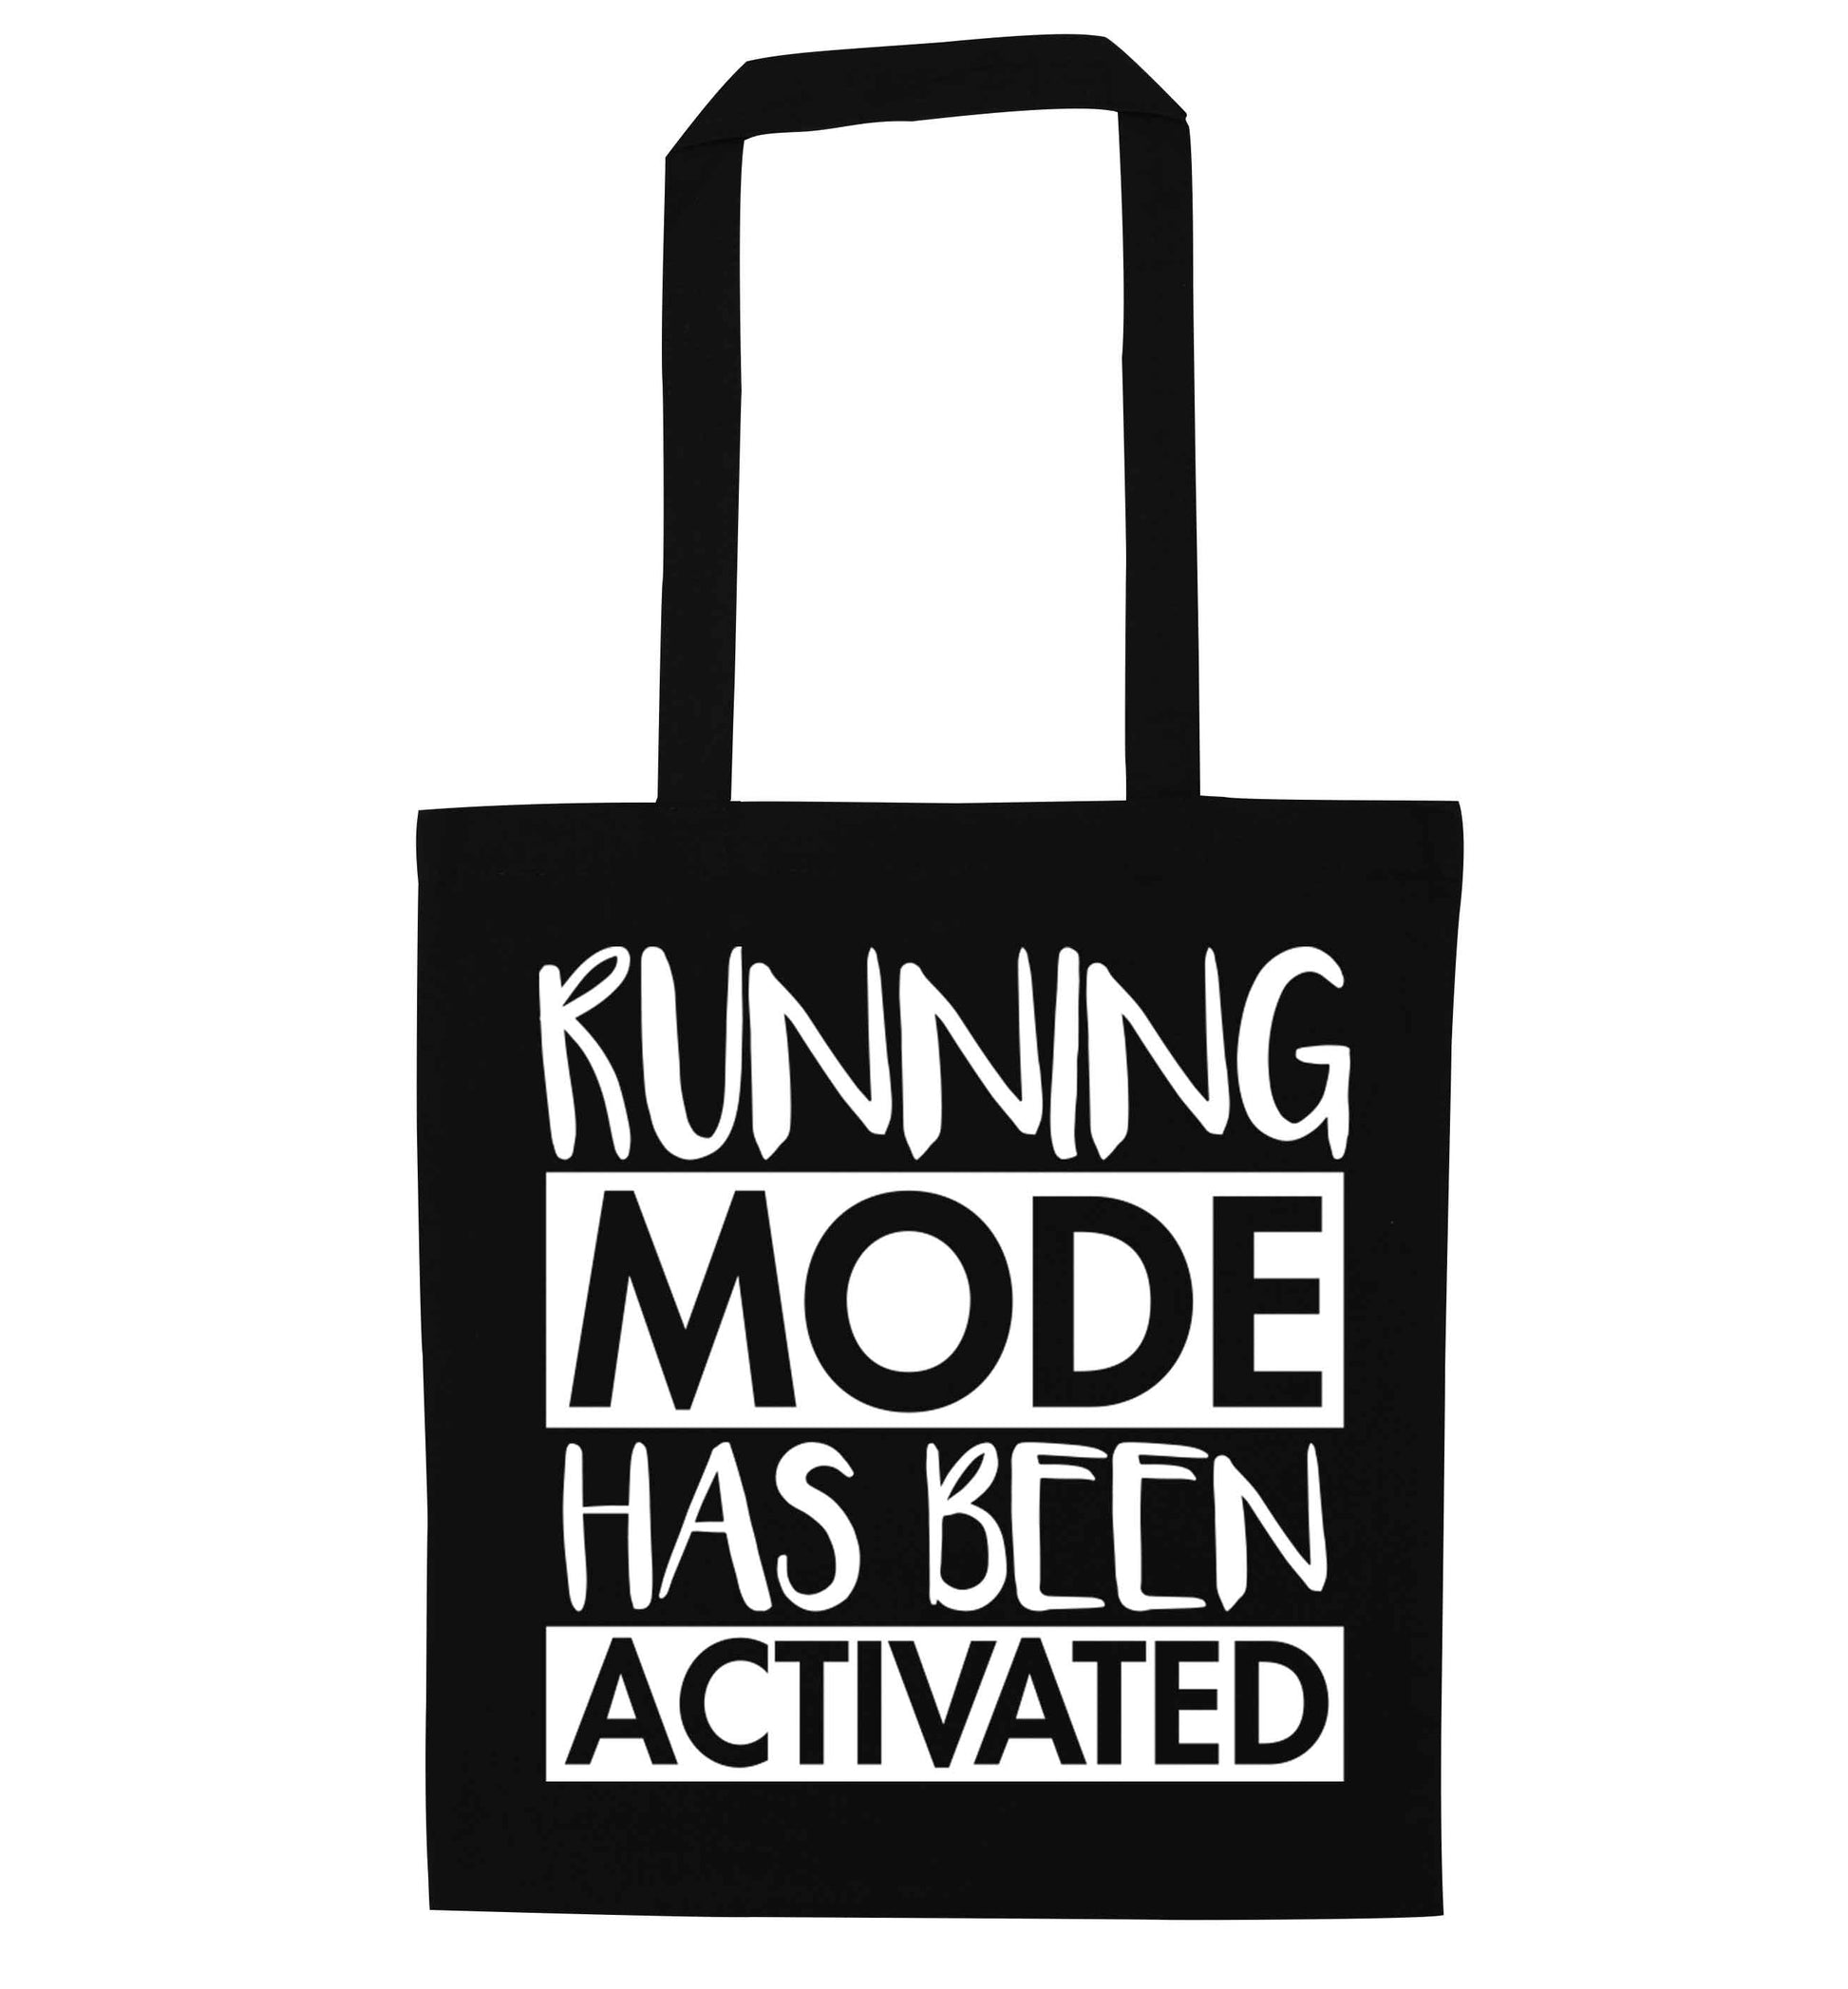 Running mode has been activated black tote bag